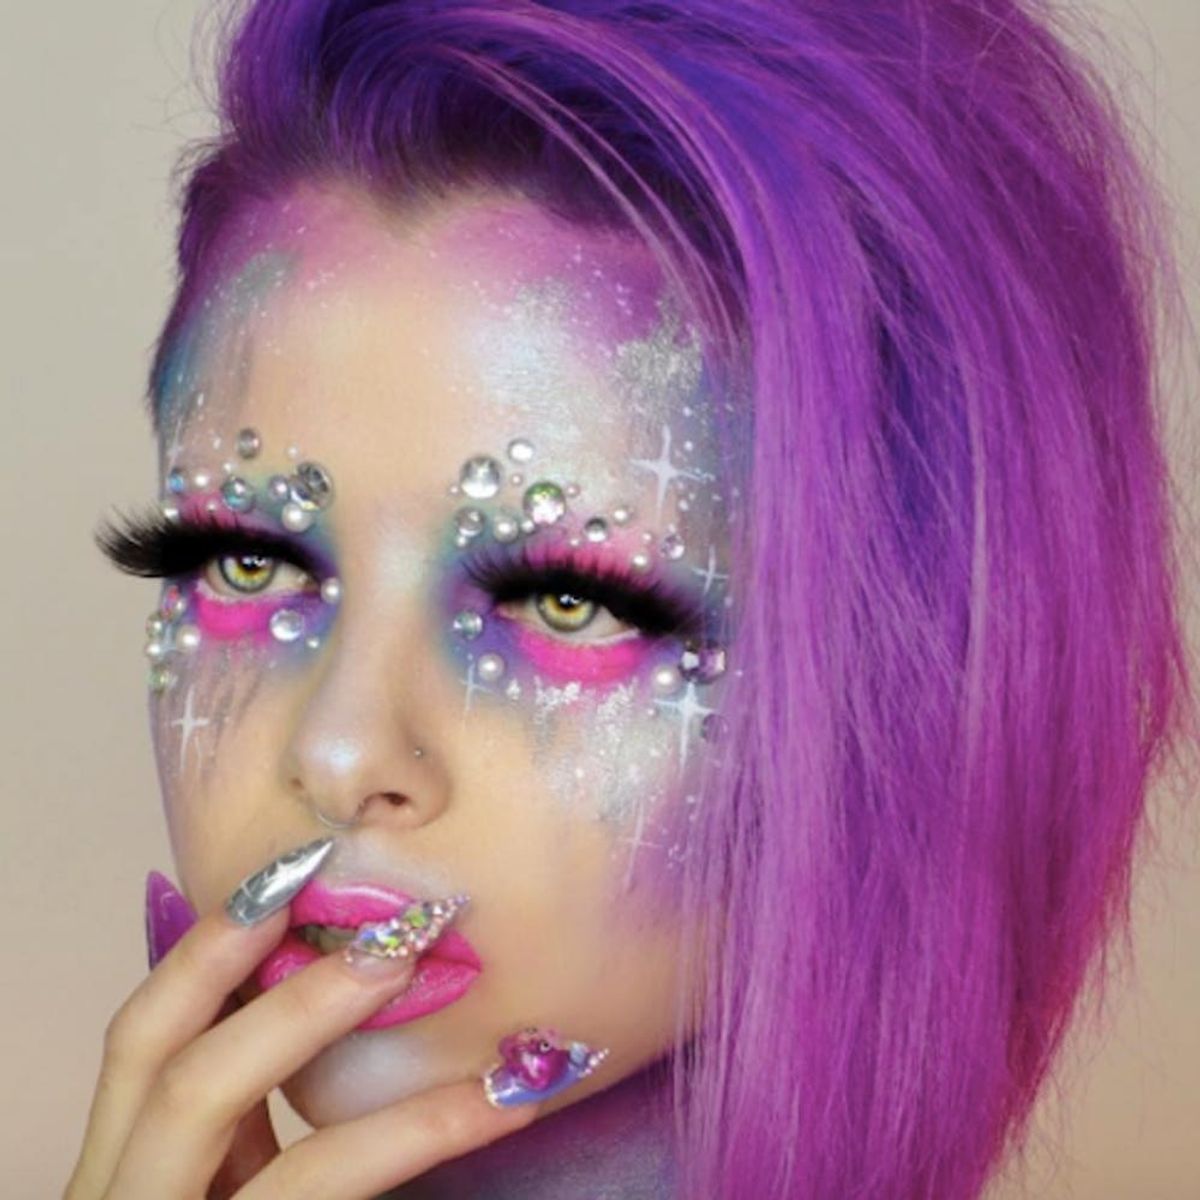 Lisa Frank-Inspired Make-Up Is What Our Glitter Rainbow Dreams Are Made Of